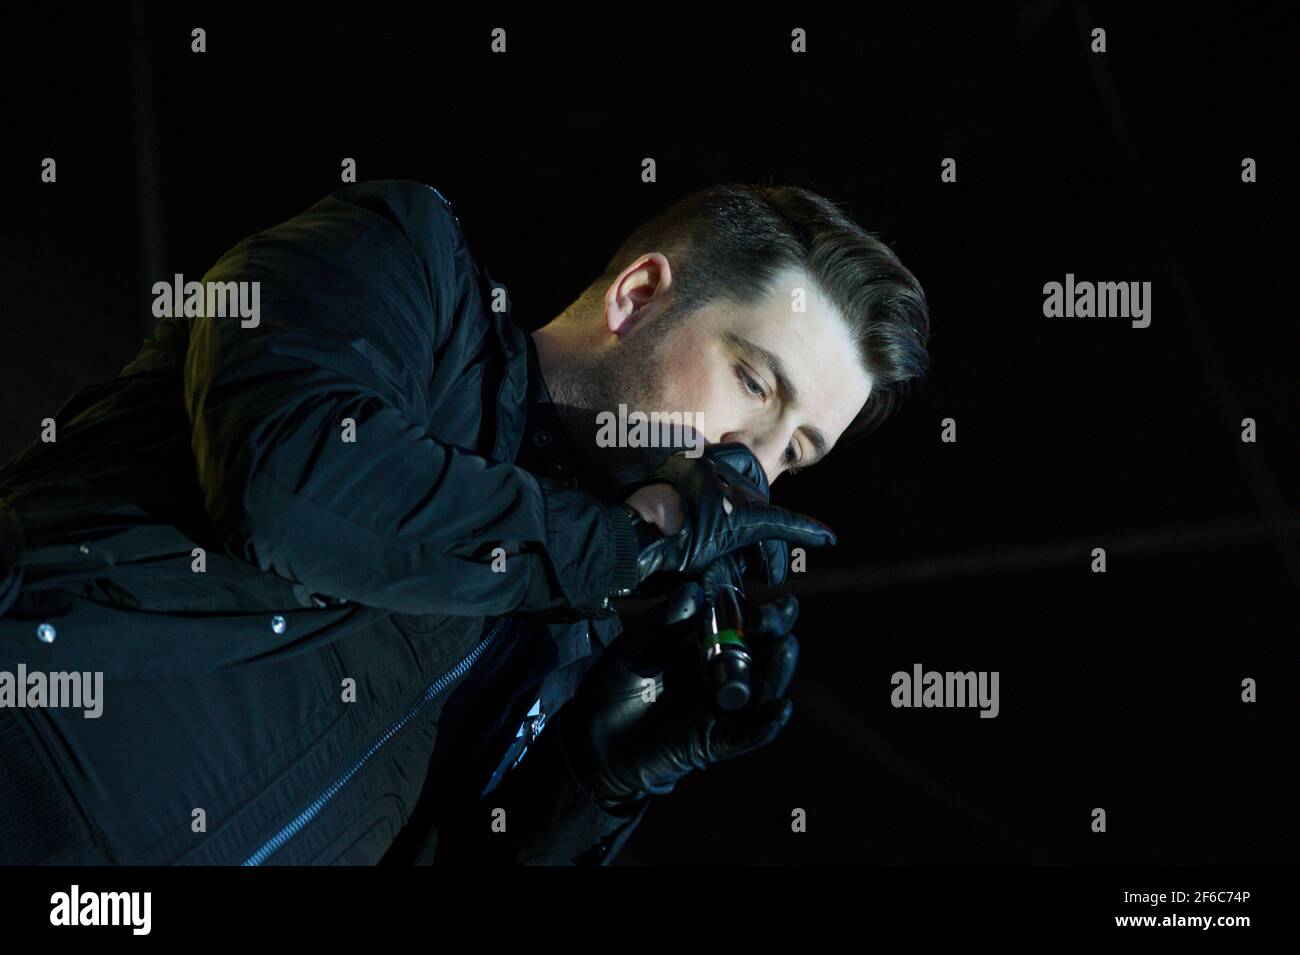 Markus Feehily of Westlife performing live at The Midlands Festival 2010 Stock Photo